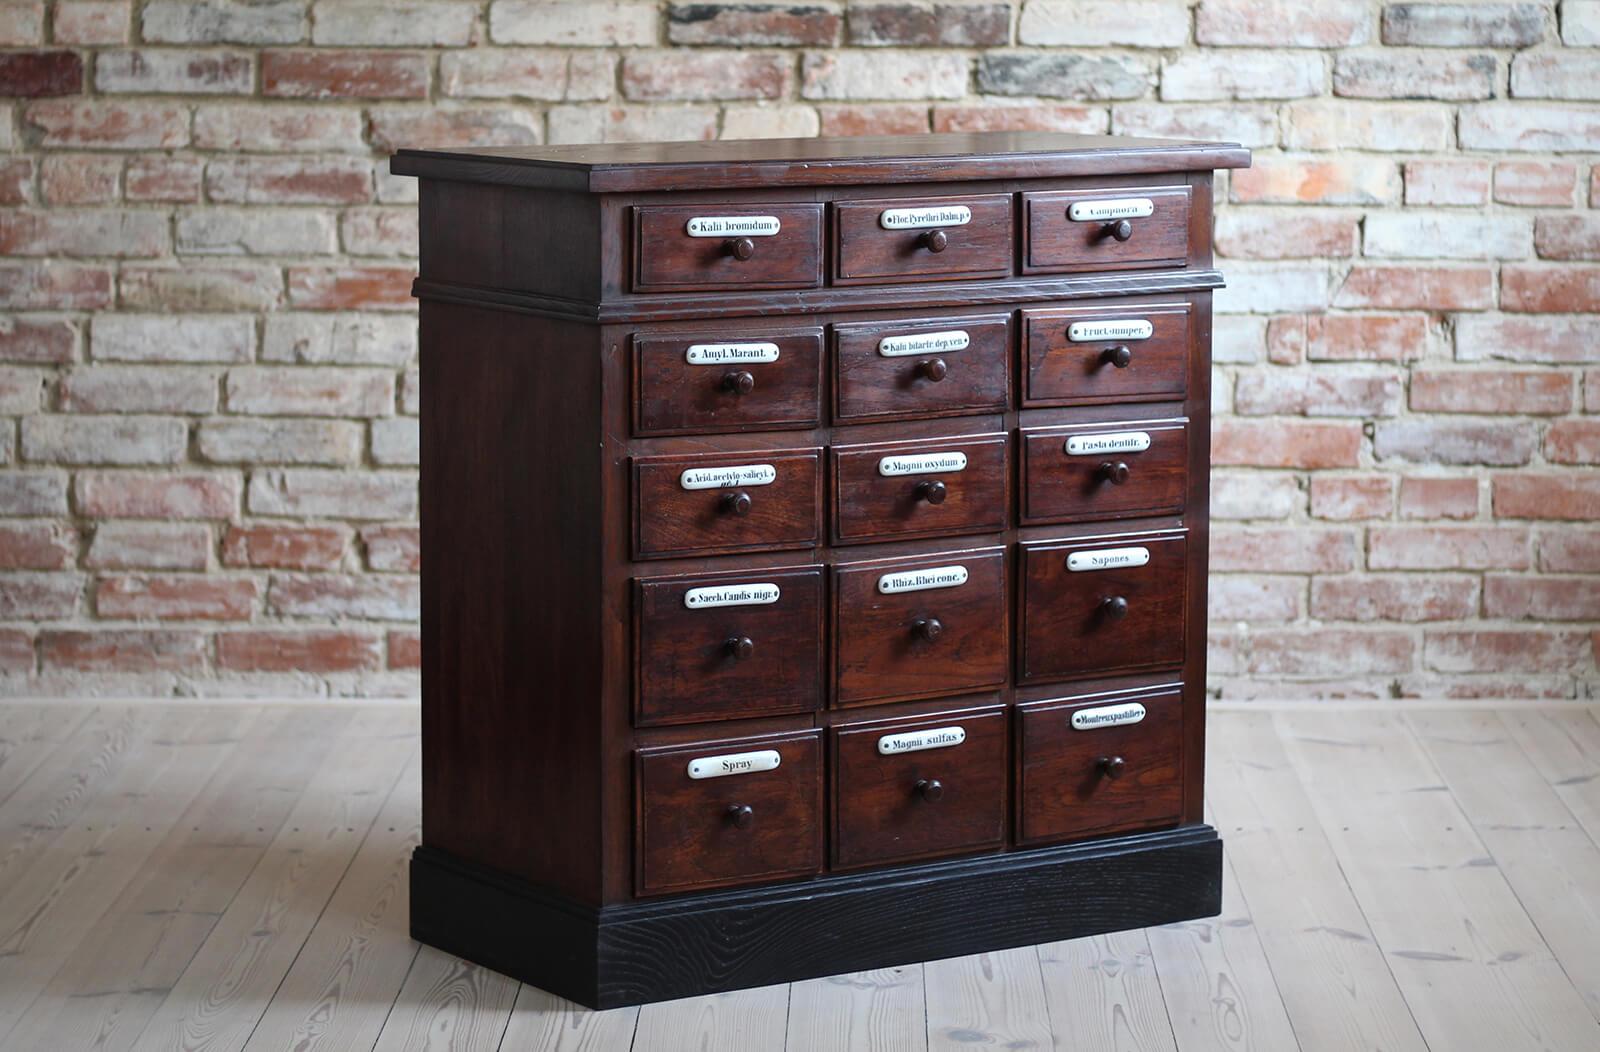 This apothecary chest of drawers was made around early 20th century. It is made of oakwood and has been carefully renovated, preserving original patina and traces of time. All surfaces have been cleaned and protected with natural wax. In addition,